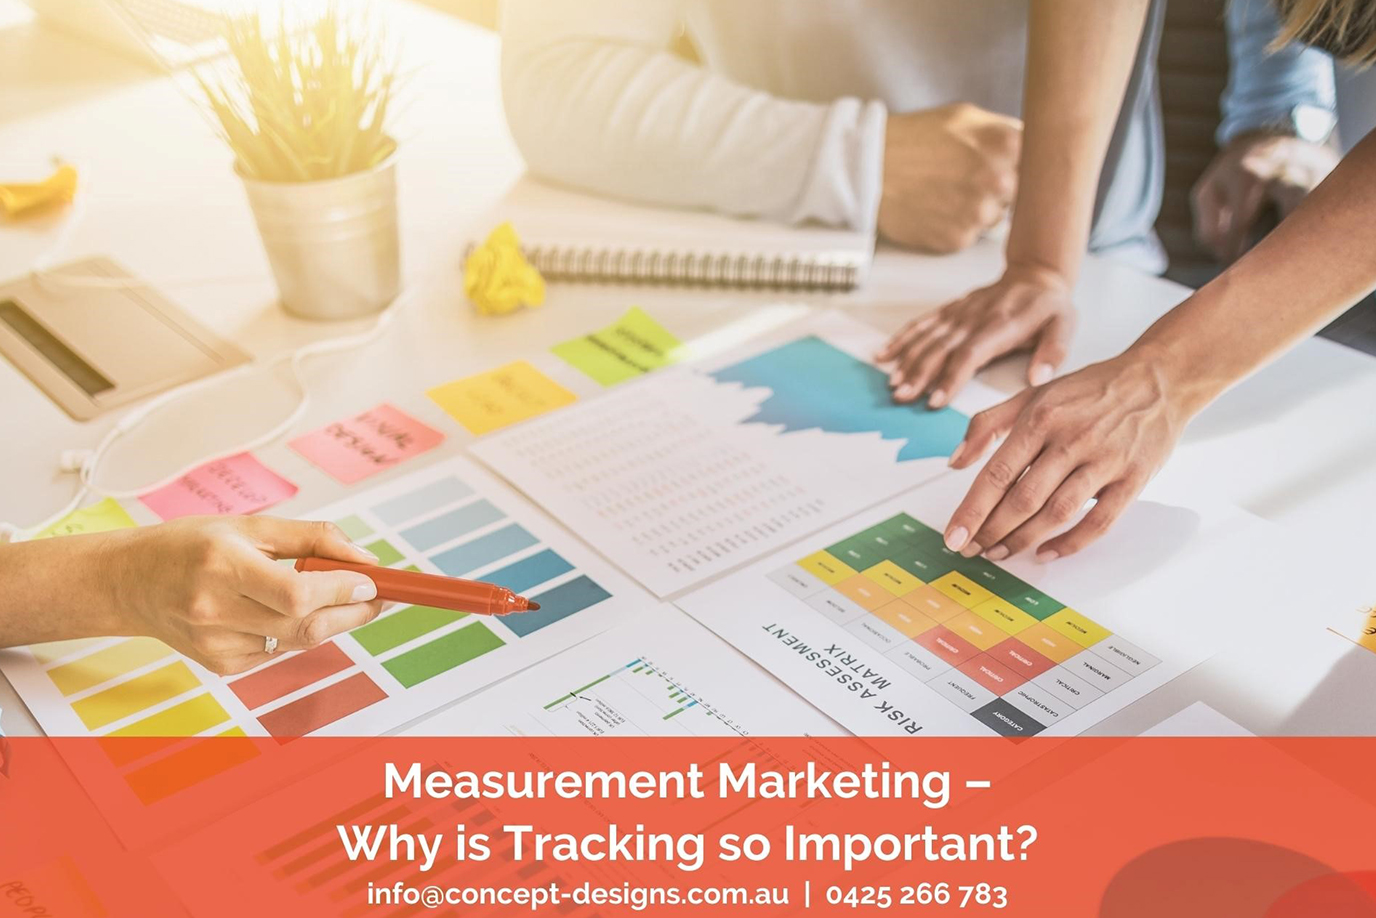 Measurement Marketing – Why is Tracking so Important?